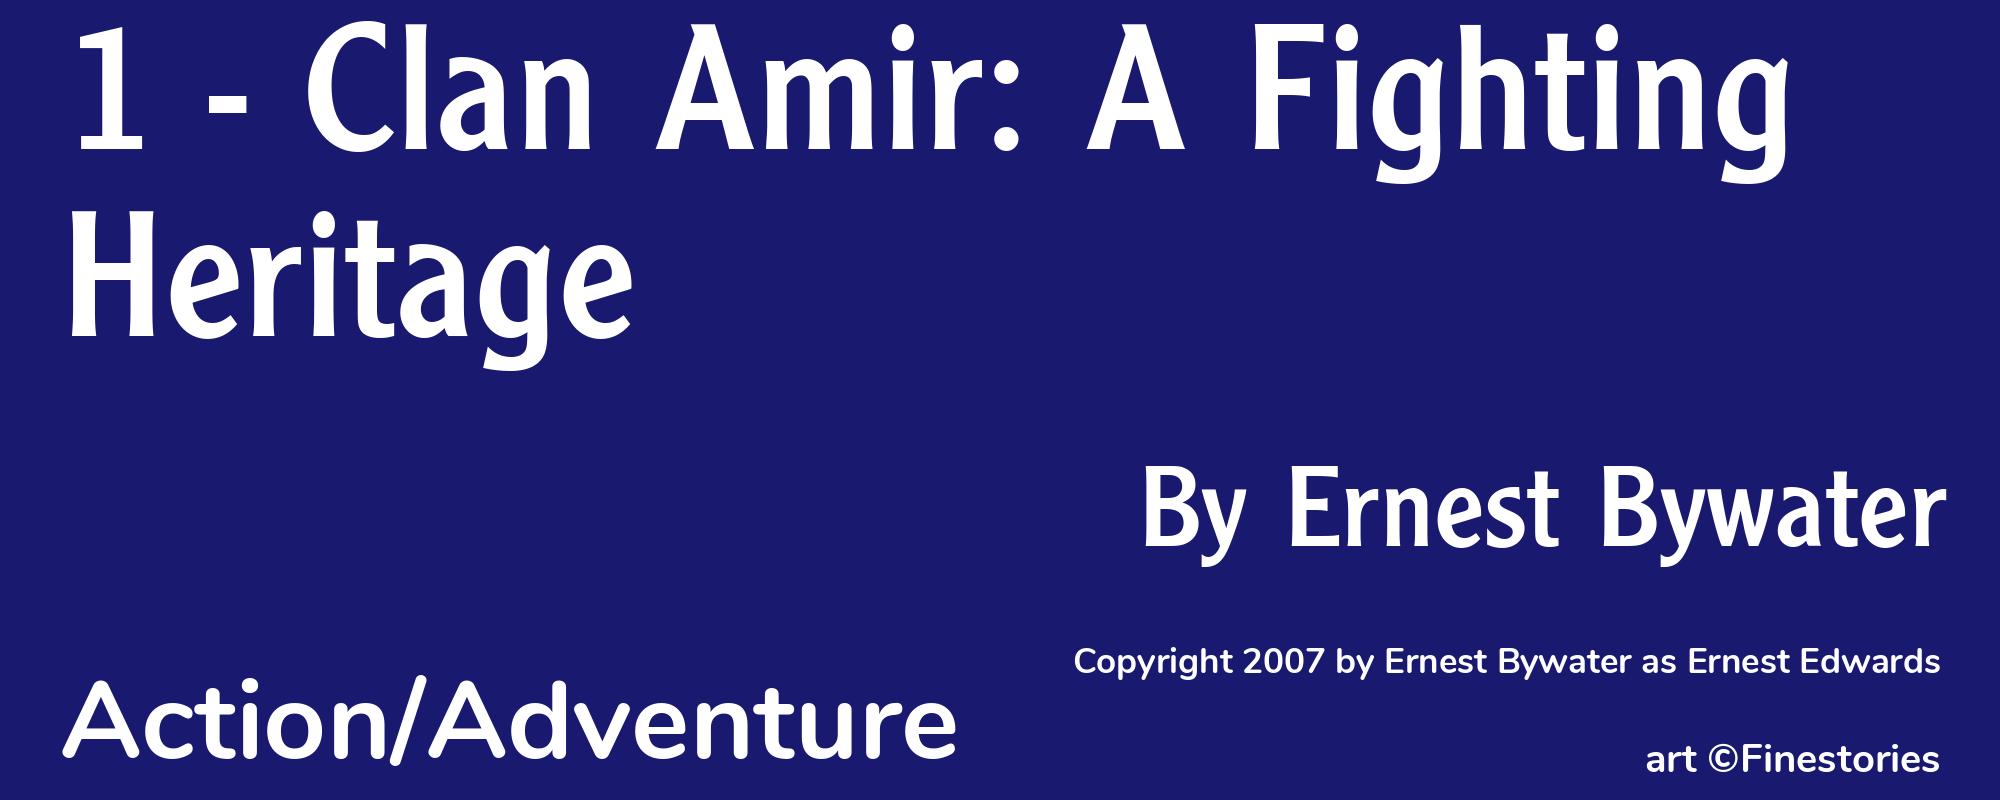 1 - Clan Amir: A Fighting Heritage - Cover